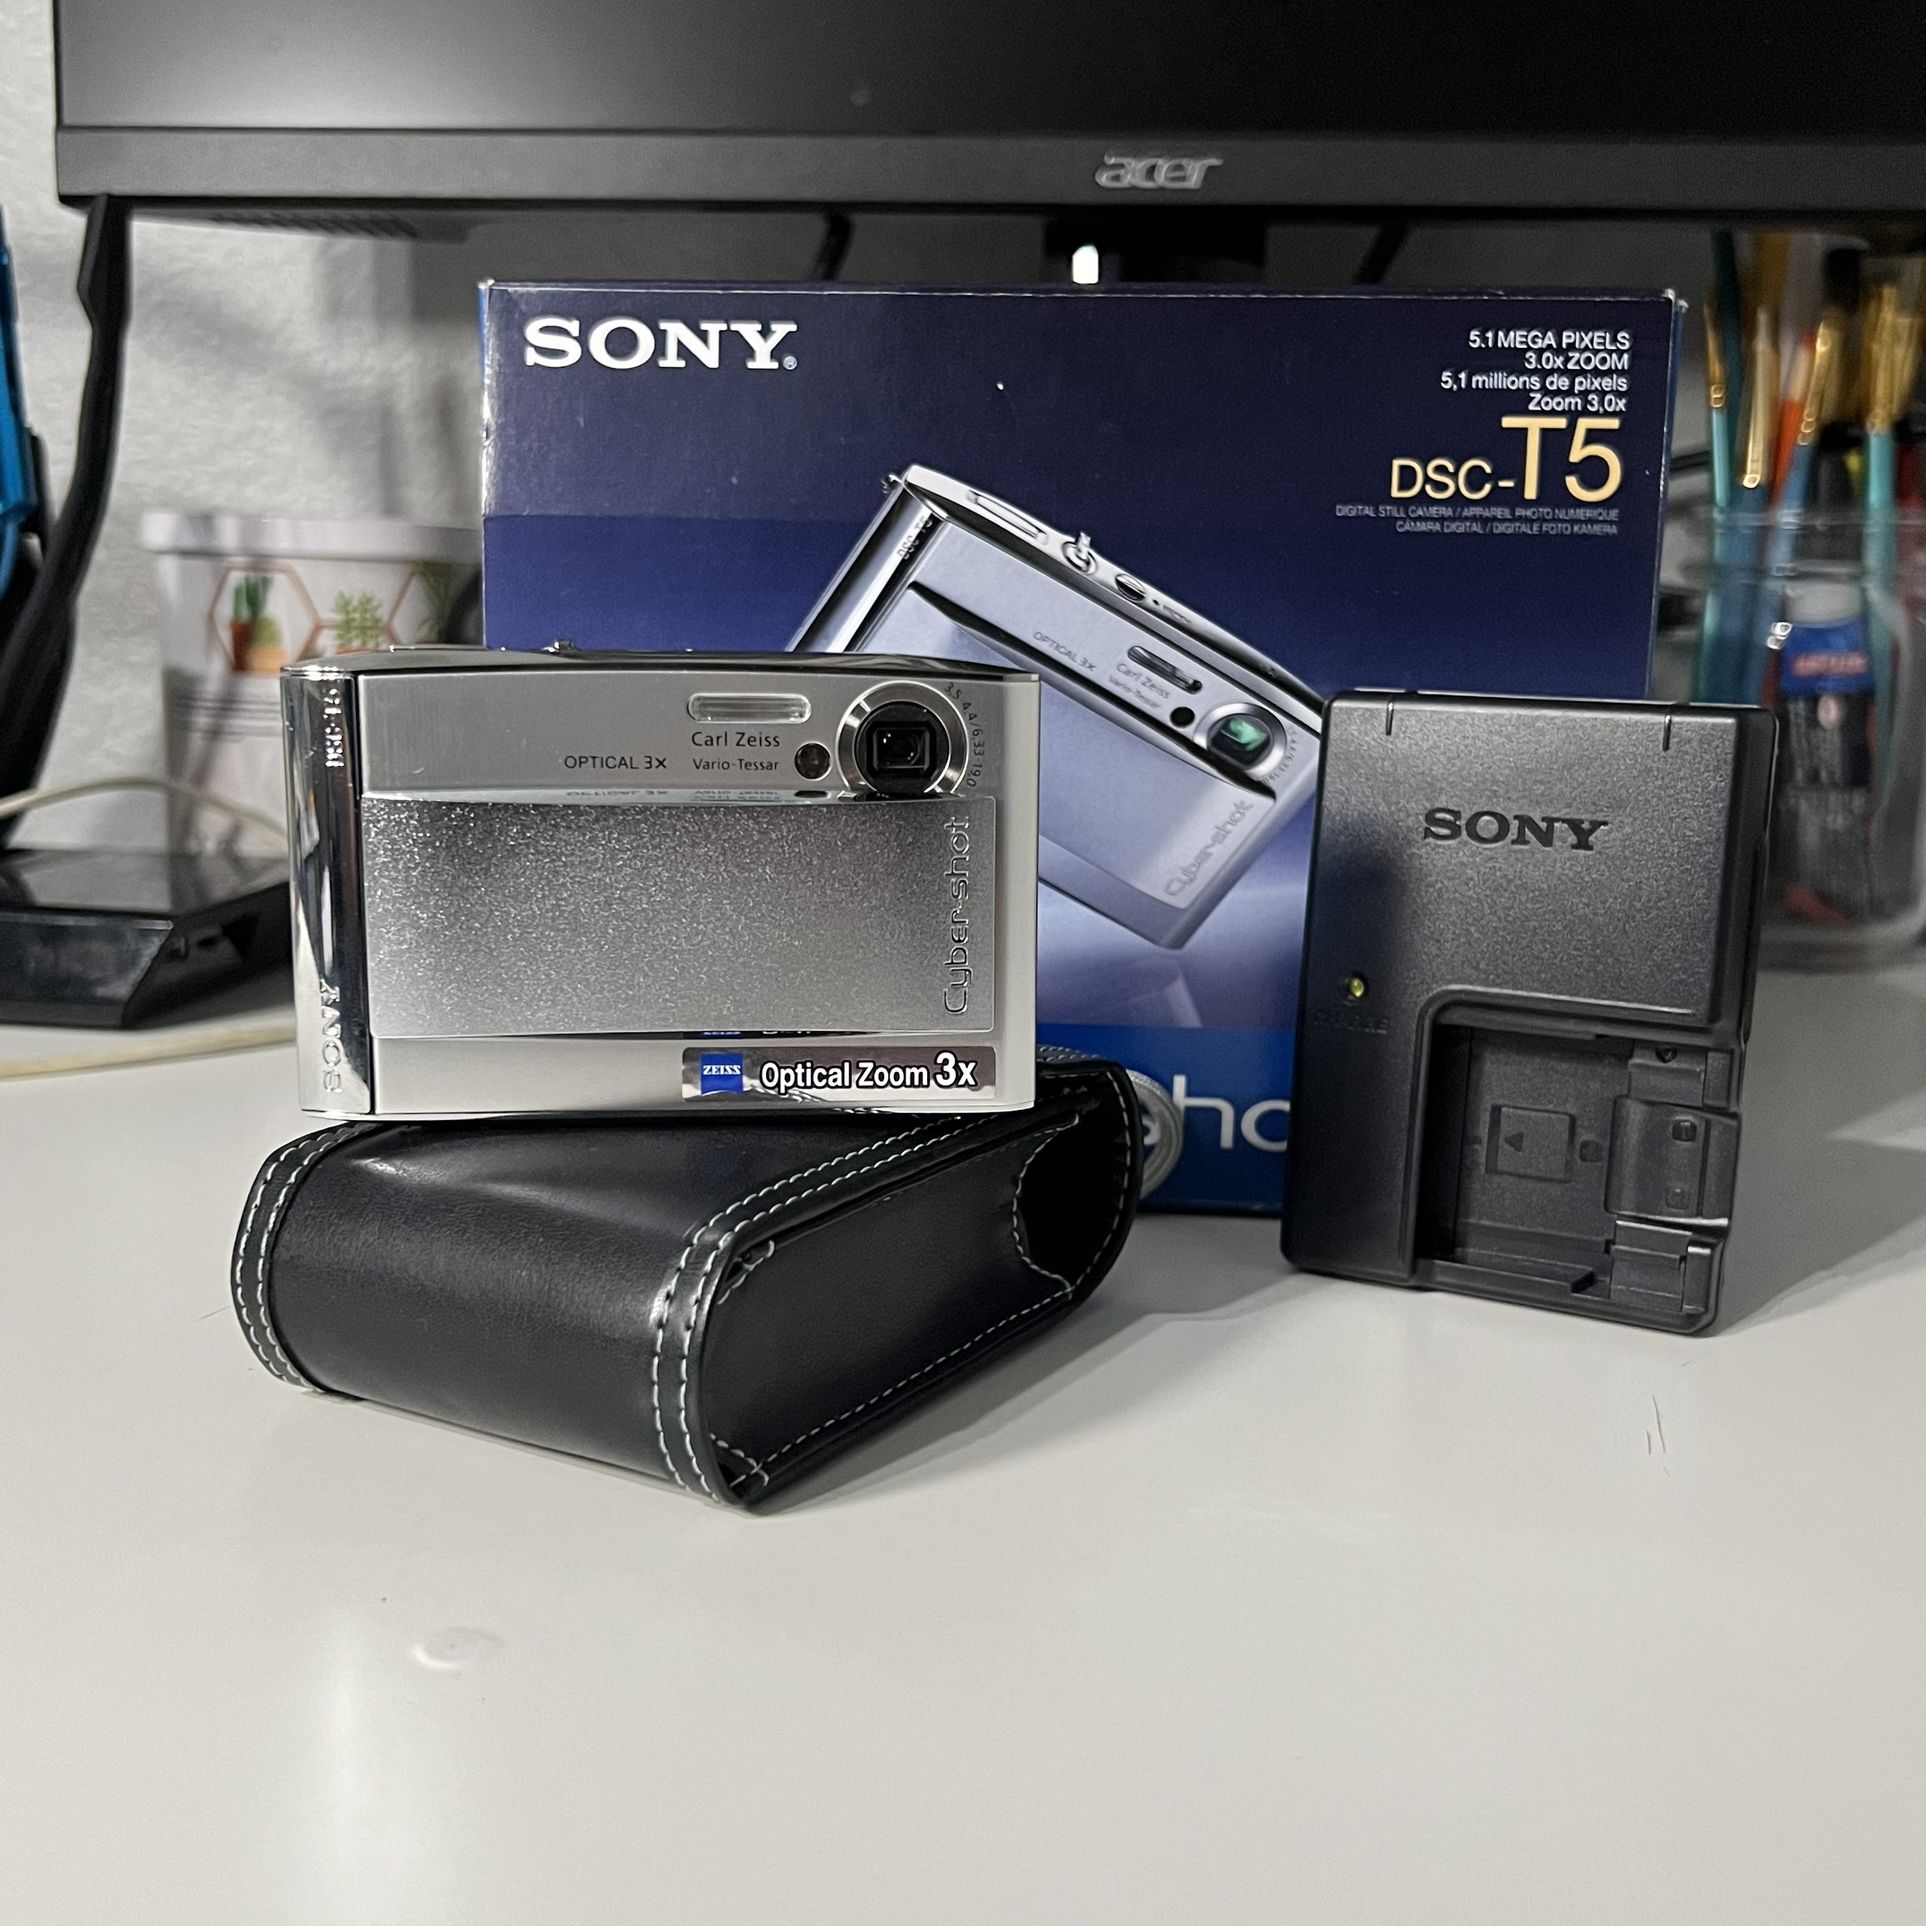 Sony Cybershot Digital Point and Shoot 